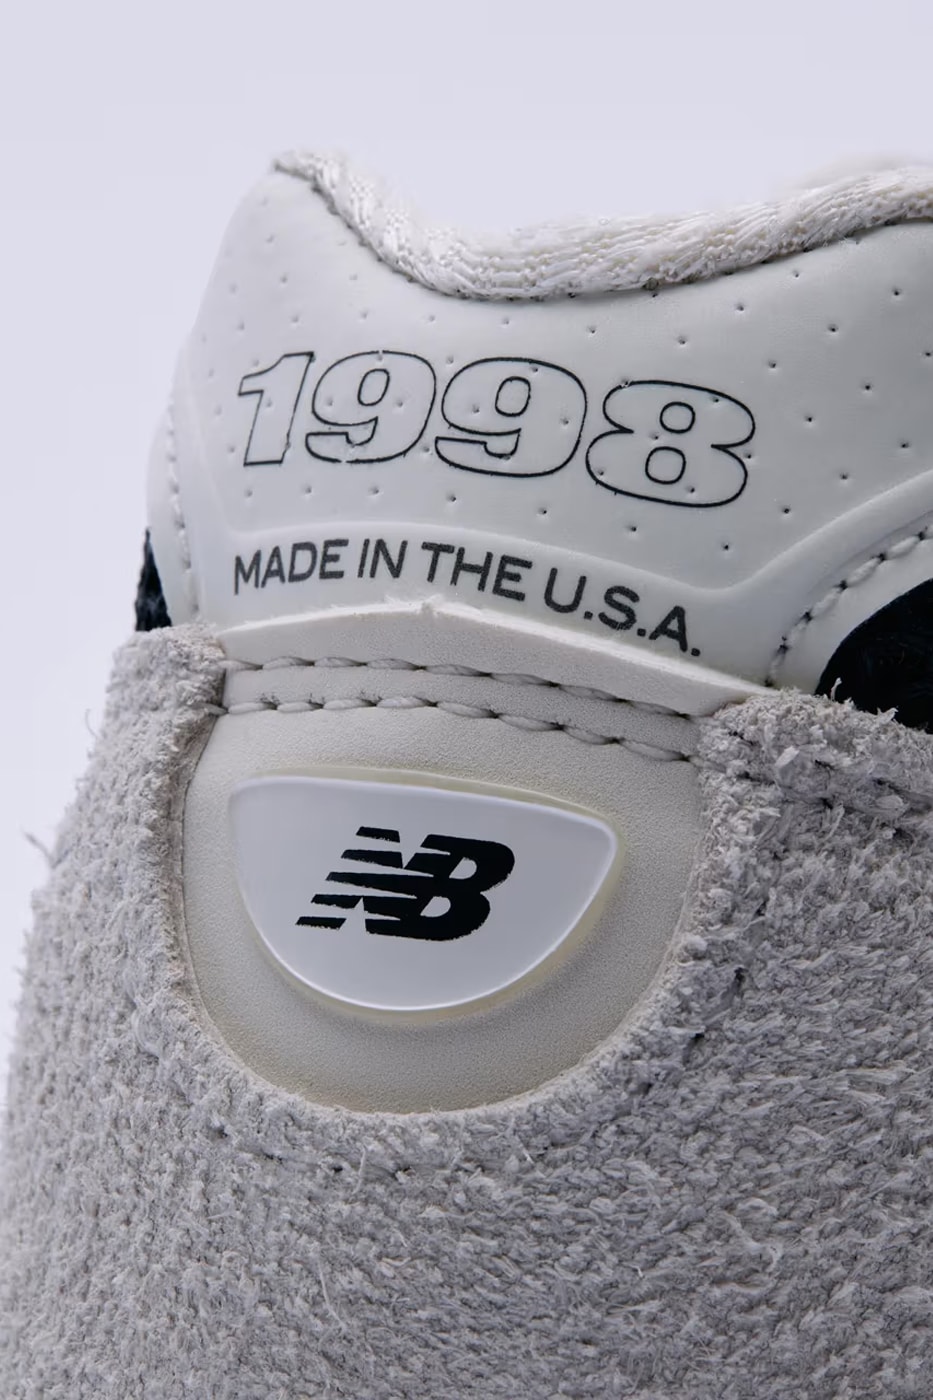 Joe Freshgoods Reveals New Balance 990v4 Collab Inspired by Hype Williams' 'Belly'